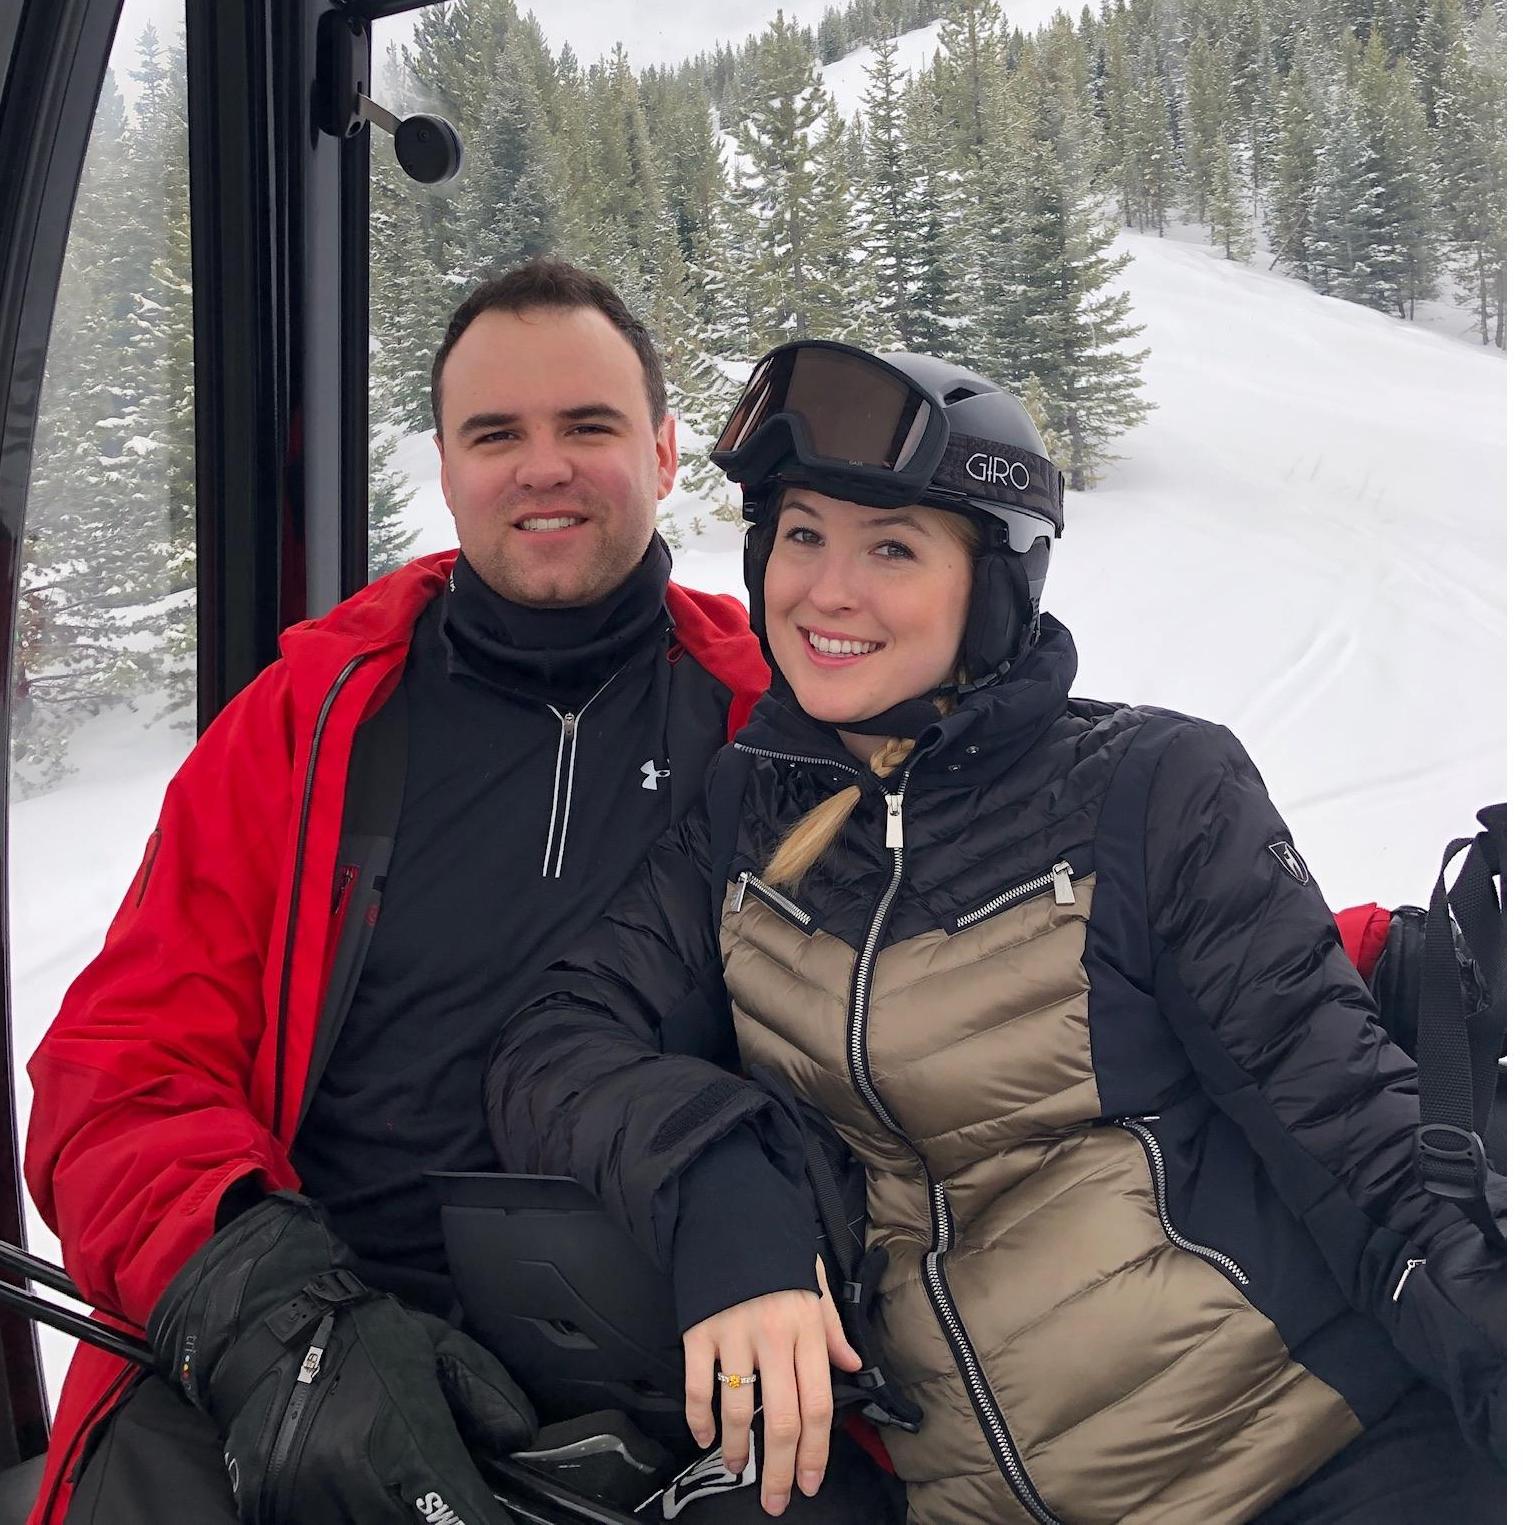 Doing on of our favorite things together - skiiing! This picture was taken on our trip to Montana with Brayton, Molly, Andre & Priscilla!